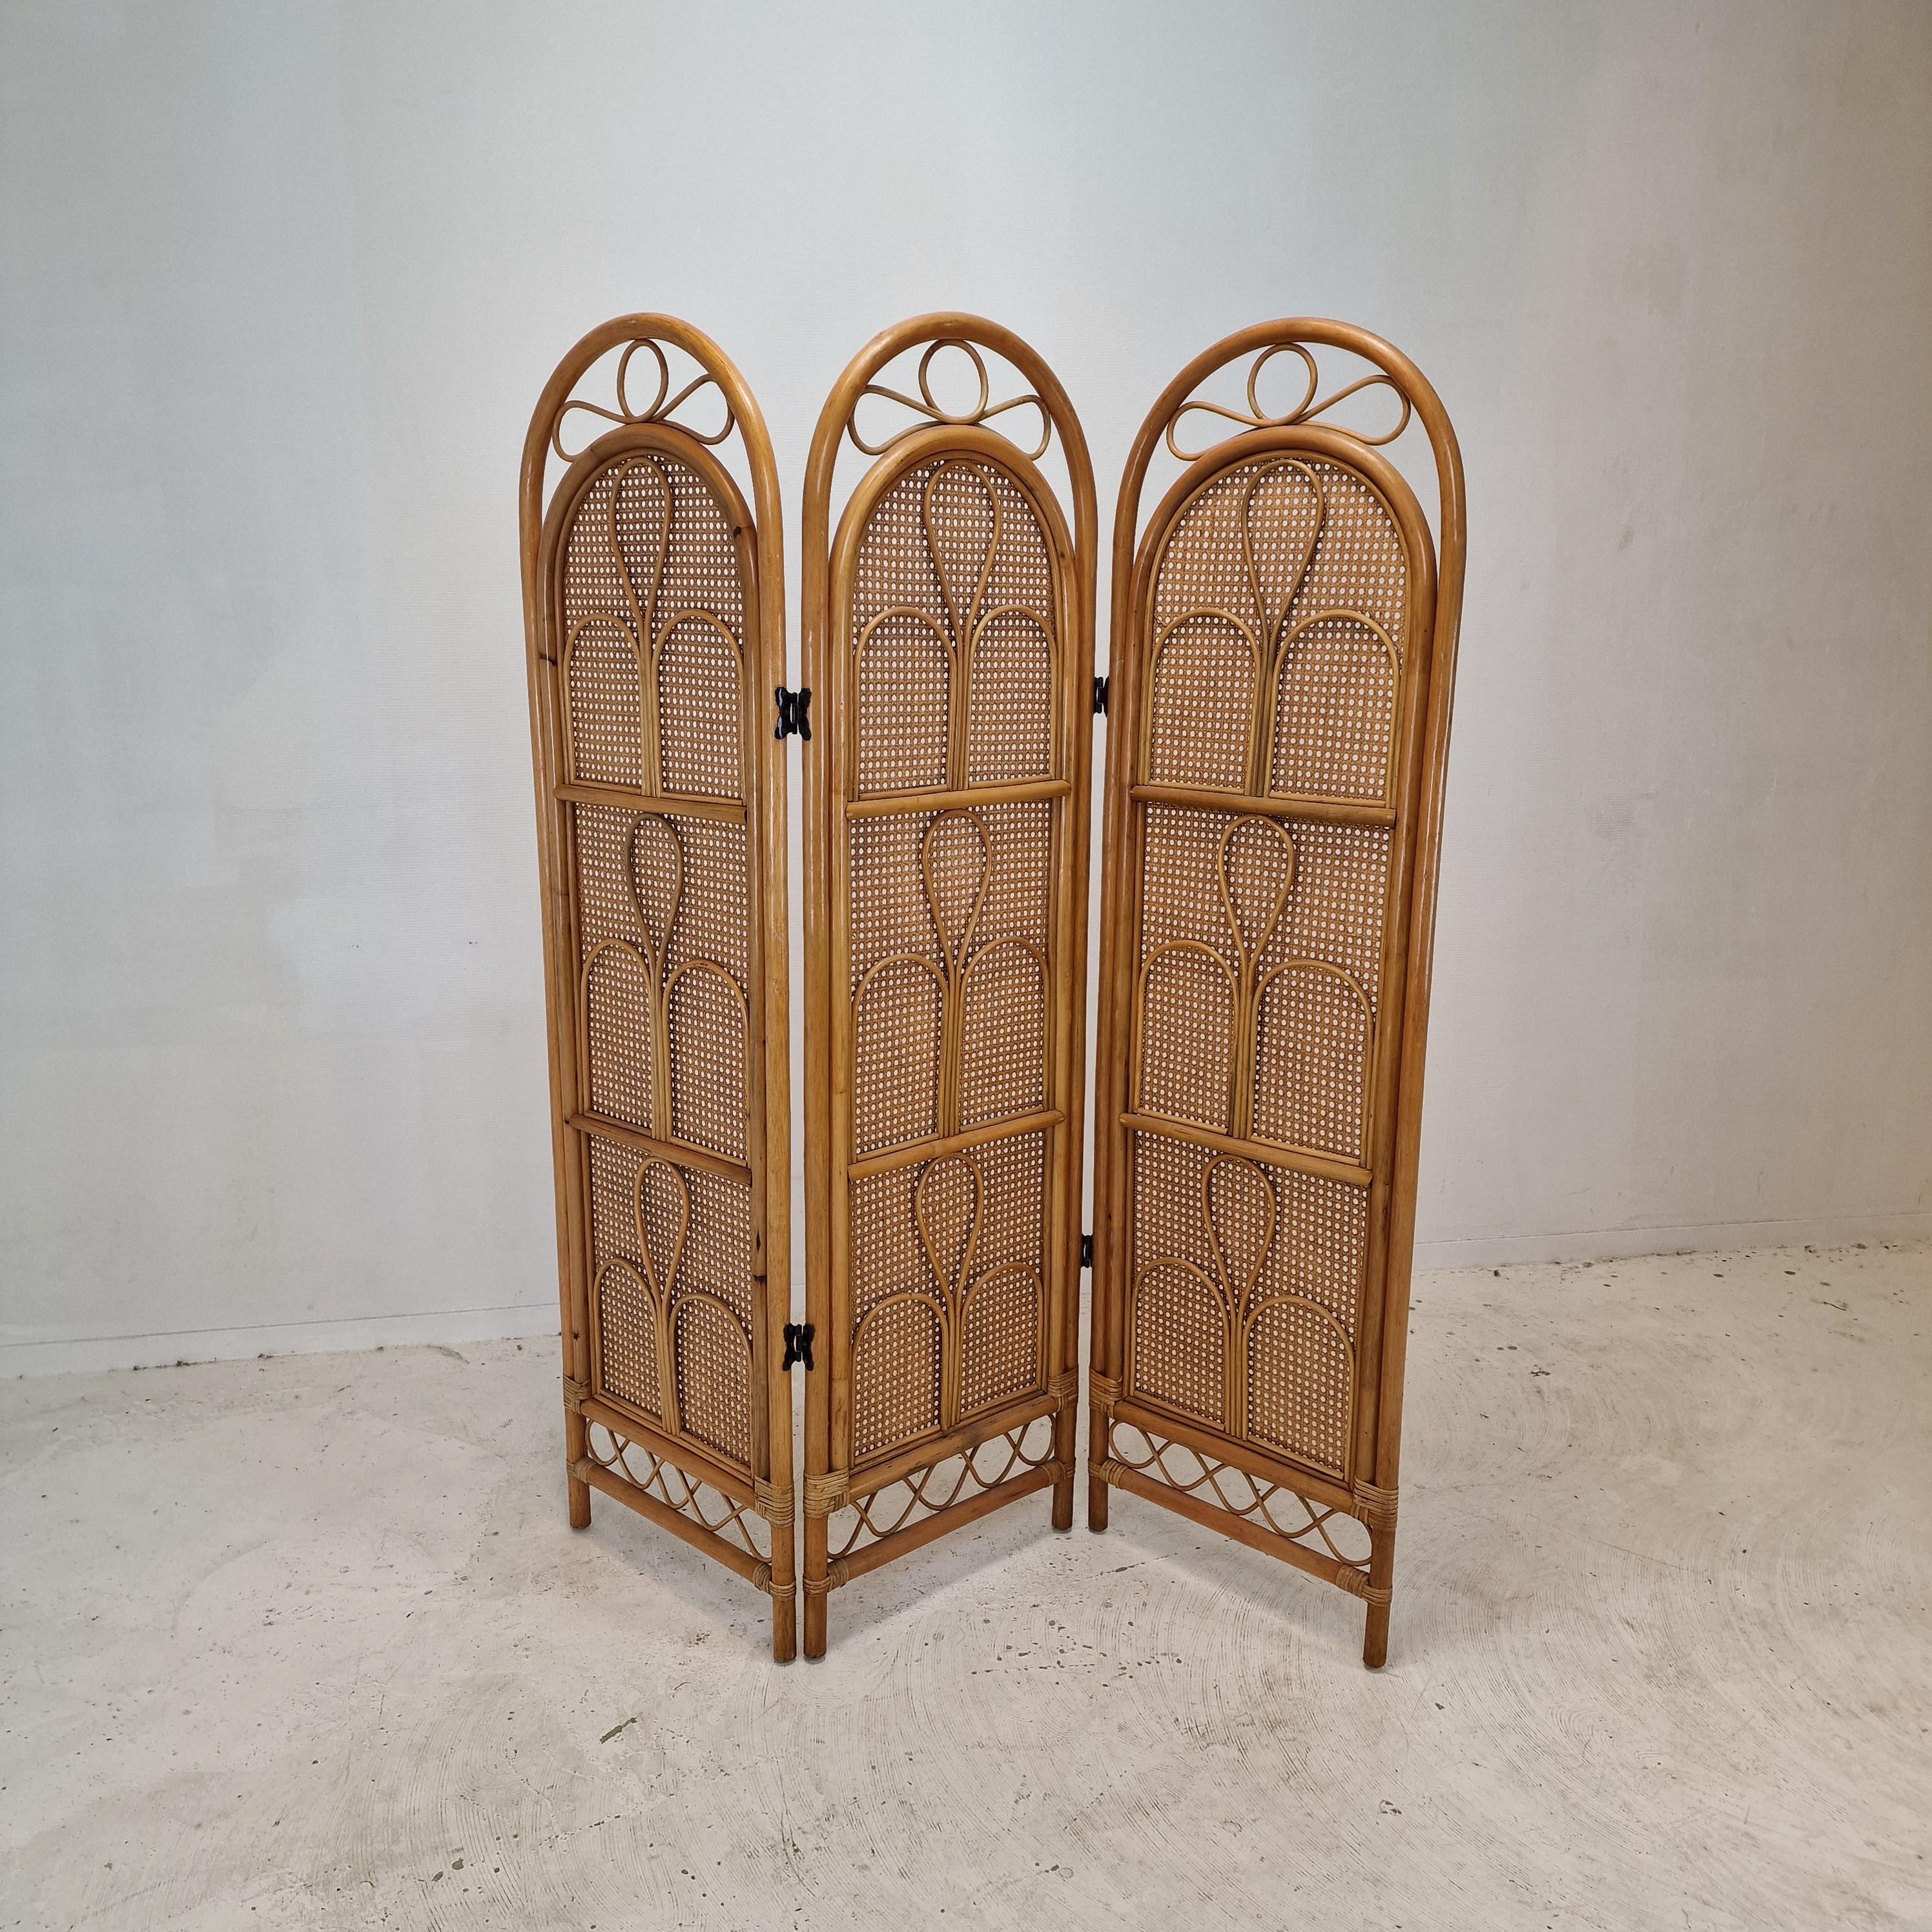 Authentic Italian rattan and wicker screen from the 60s.

Very nice work of rattan with its curls and patterns.

3 panels, usable in various positions.

Vintage product. Unique piece.

We work with professional packers and shippers, we can deliver